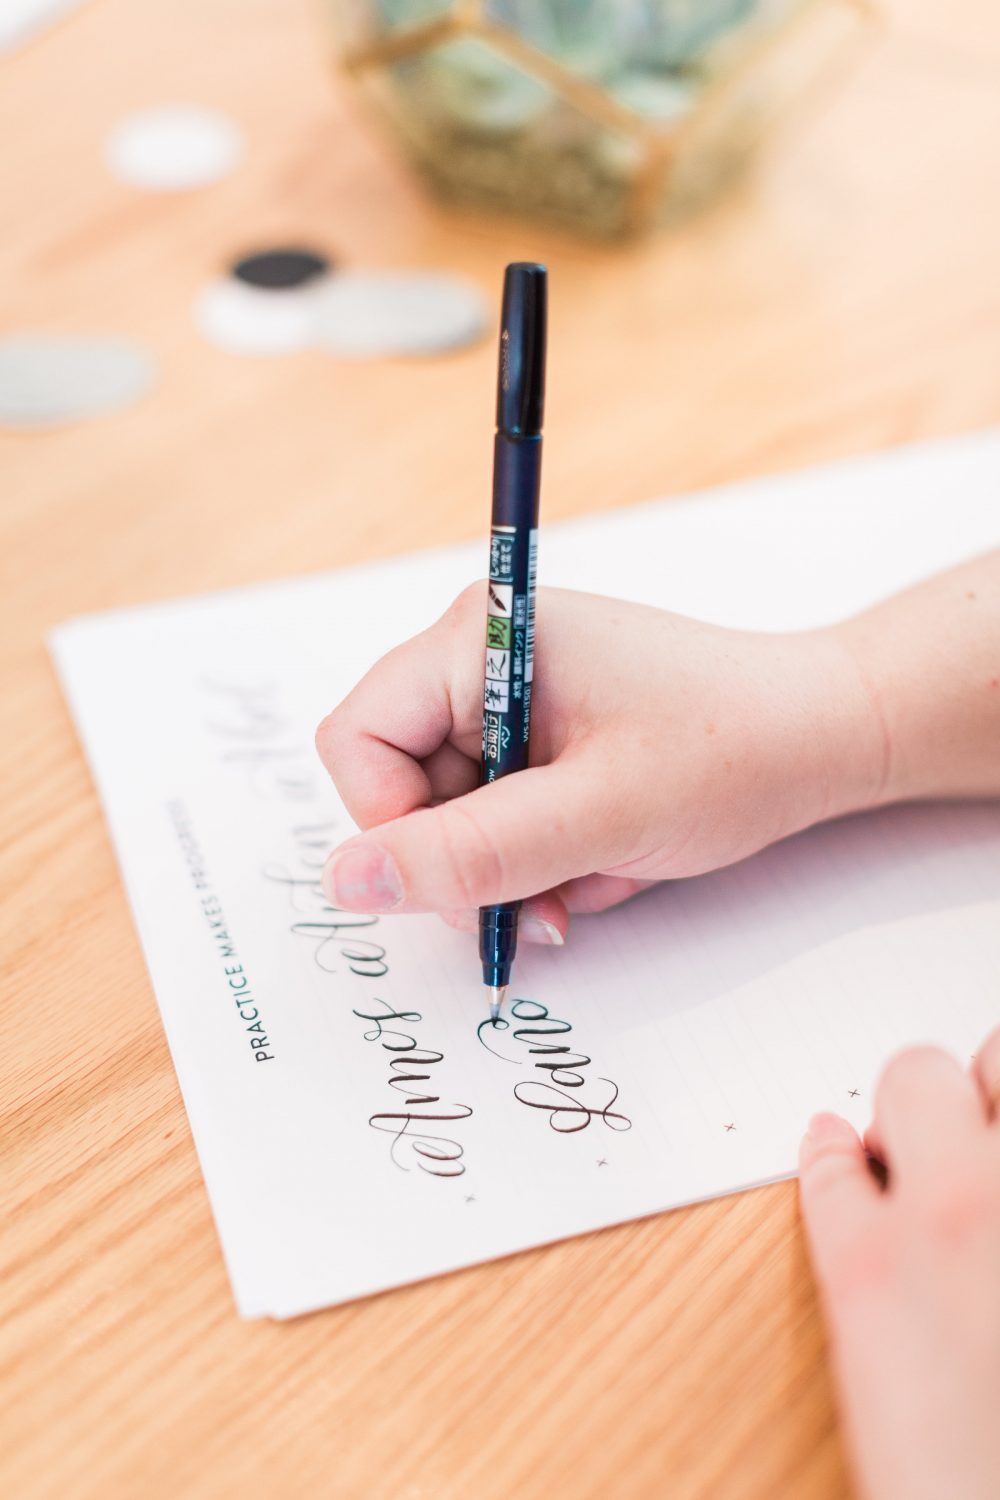 Find out how @paigefirnberg teaches brush lettering workshops using @tombowusa pens!